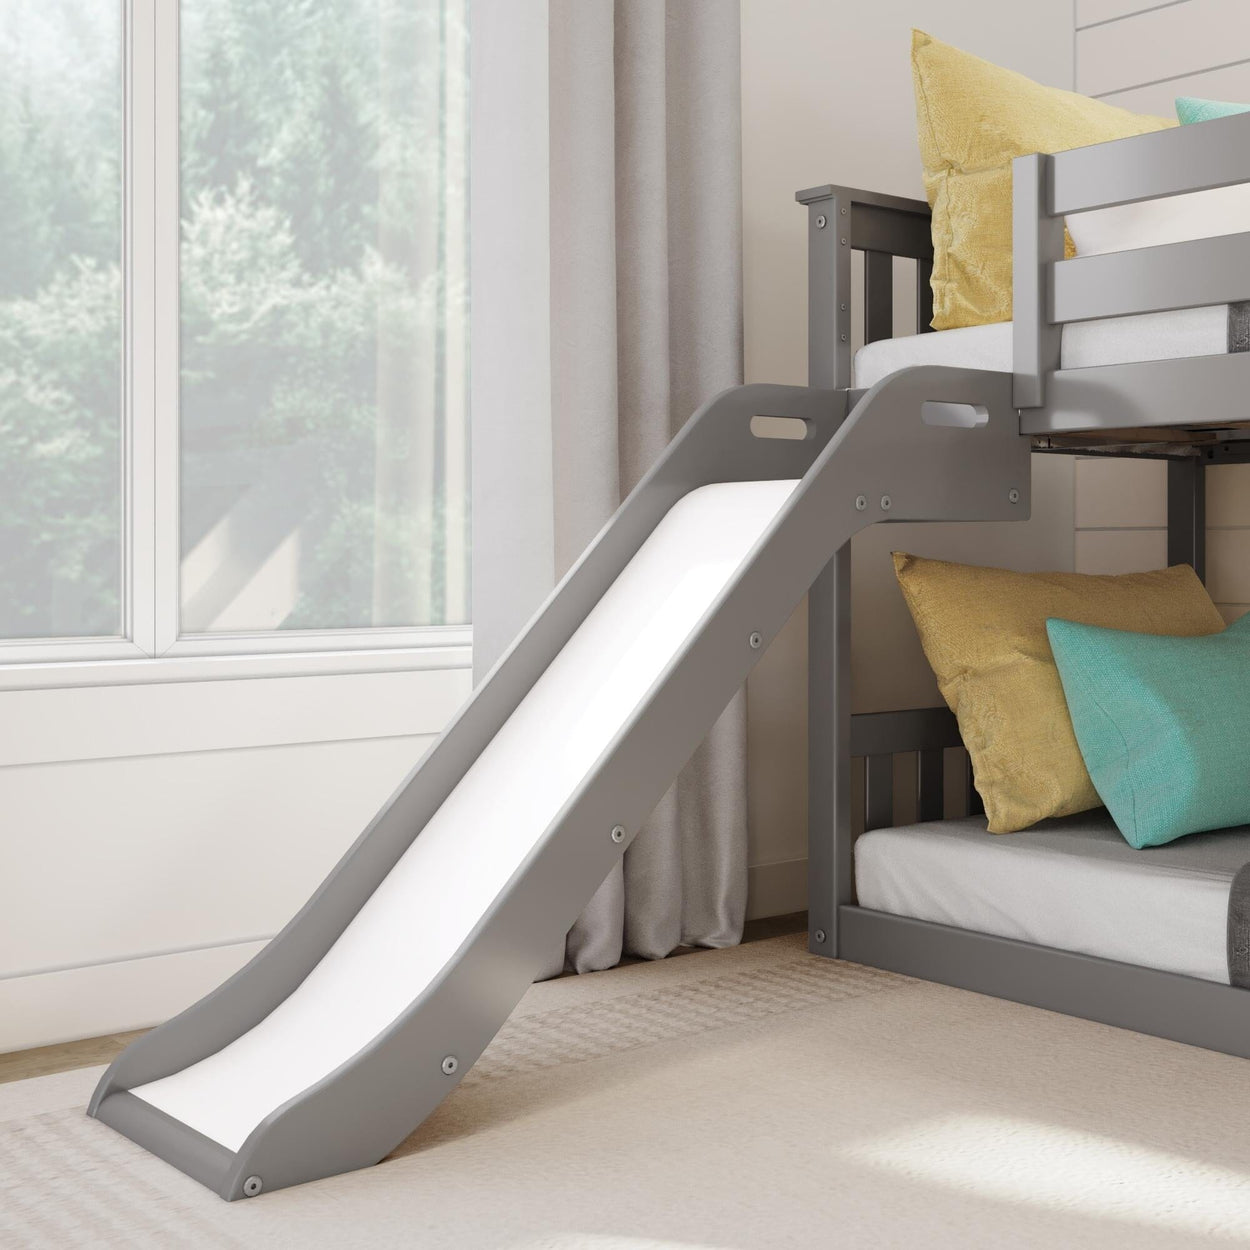 185421-121 : Bunk Beds Classic Low Bunk with Stairs and Easy Slide, Grey